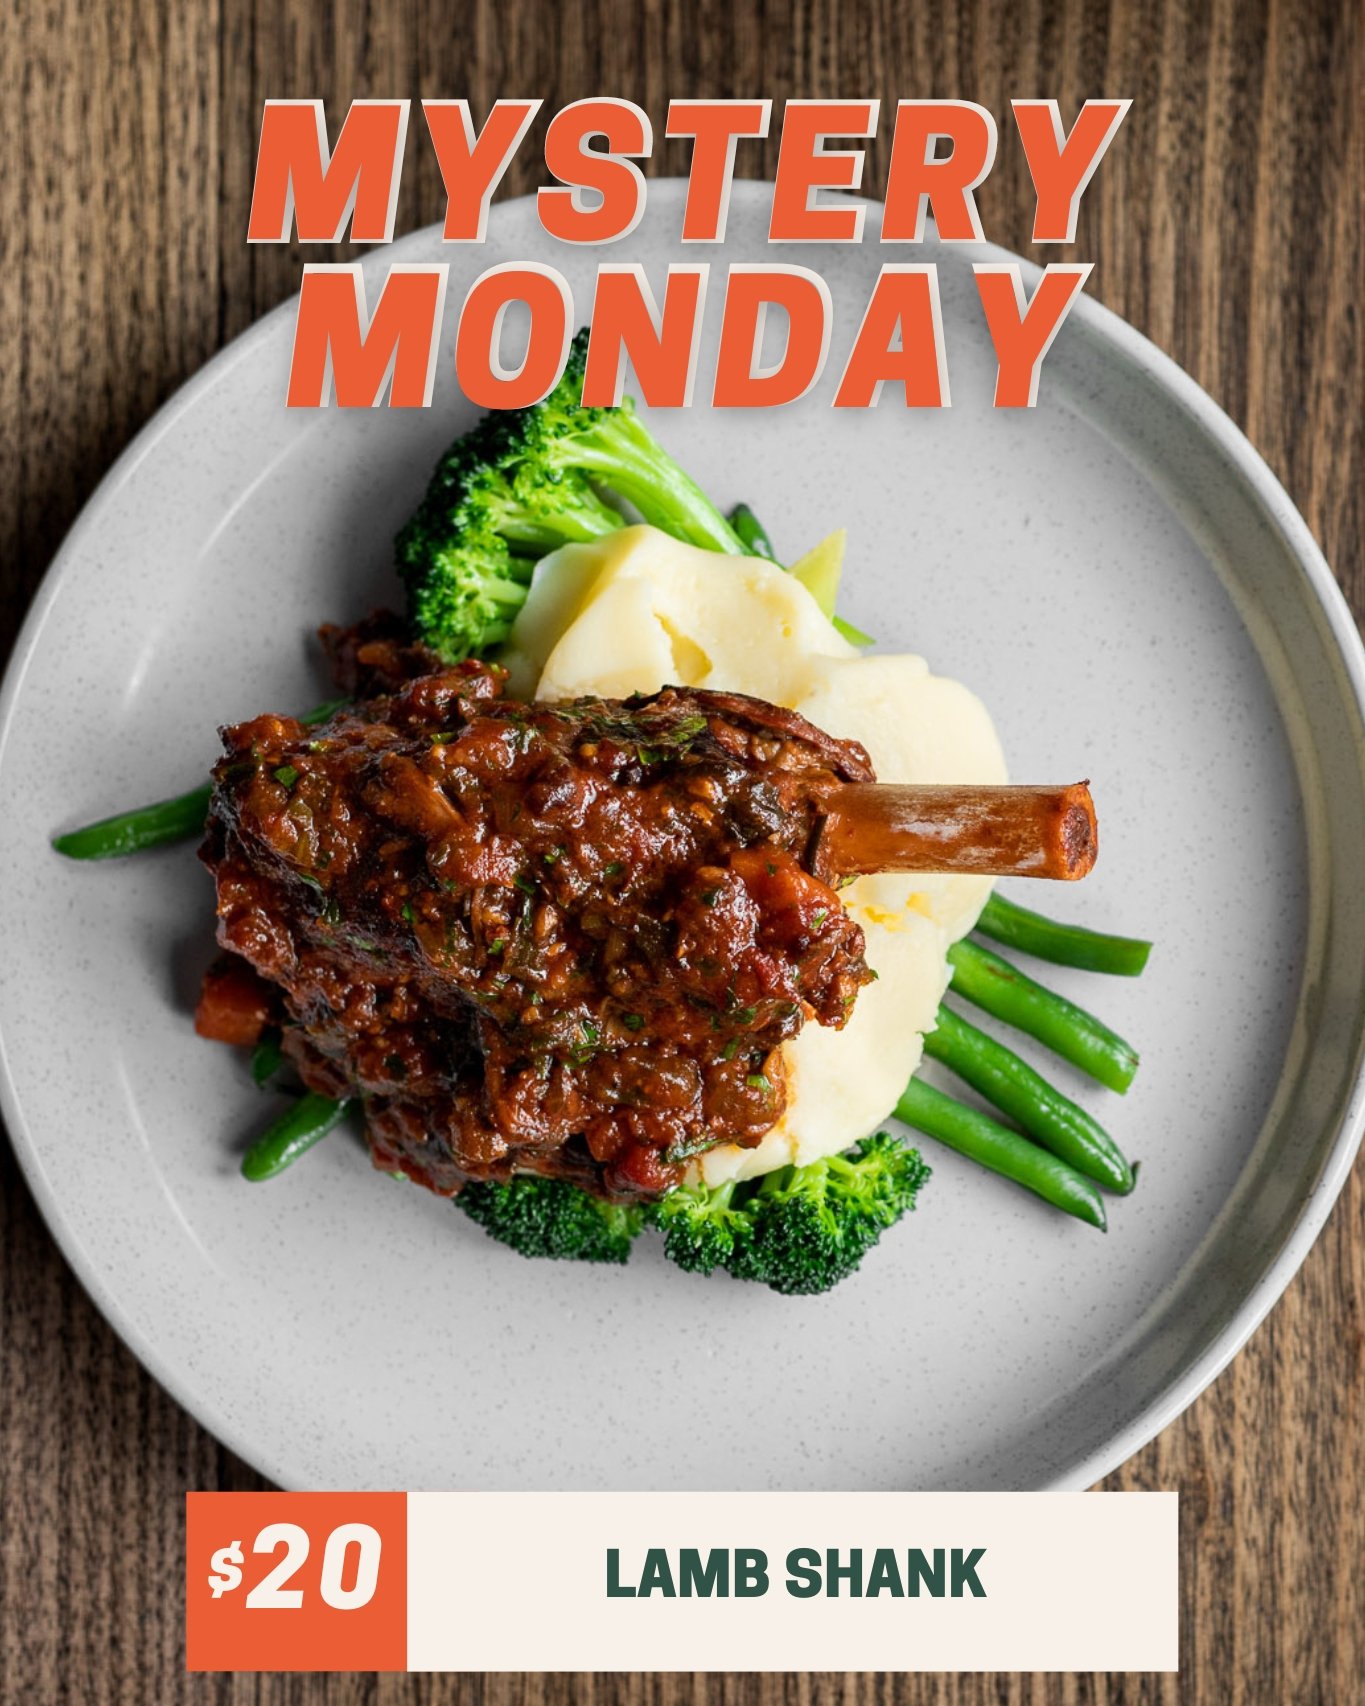 It's too good to miss! Our popular Lamb Shank will be served this Monday for only $20.

Tag your friends and get them in on this special deal. Book now!

#thecamden #camdenhotel #celebration #instagood #nomnom #foodpic #eatout #whatsonmelb #locallove